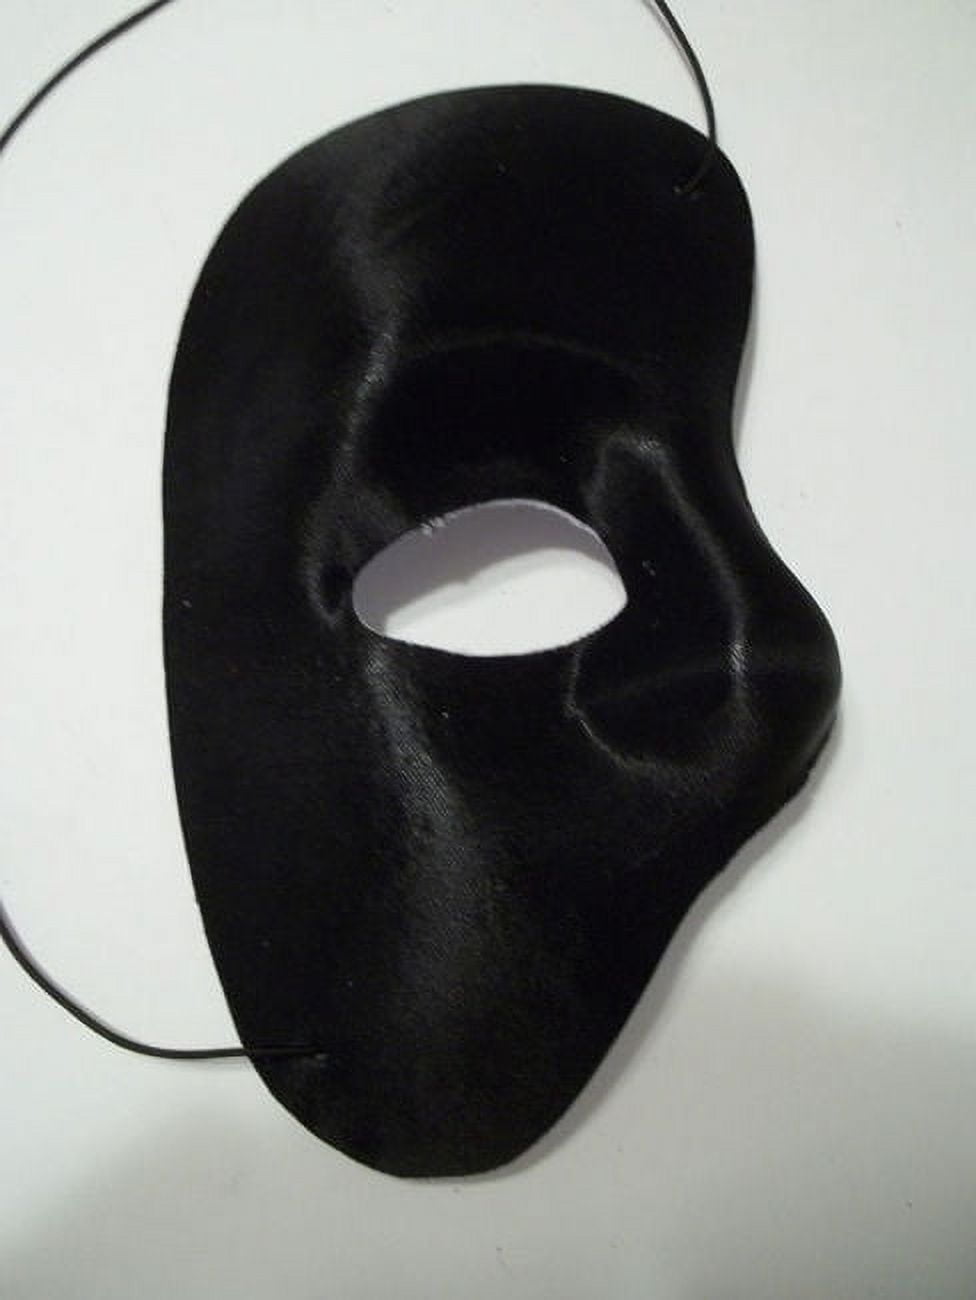 Dark Opera Masquerade Costume  Now Available at  –